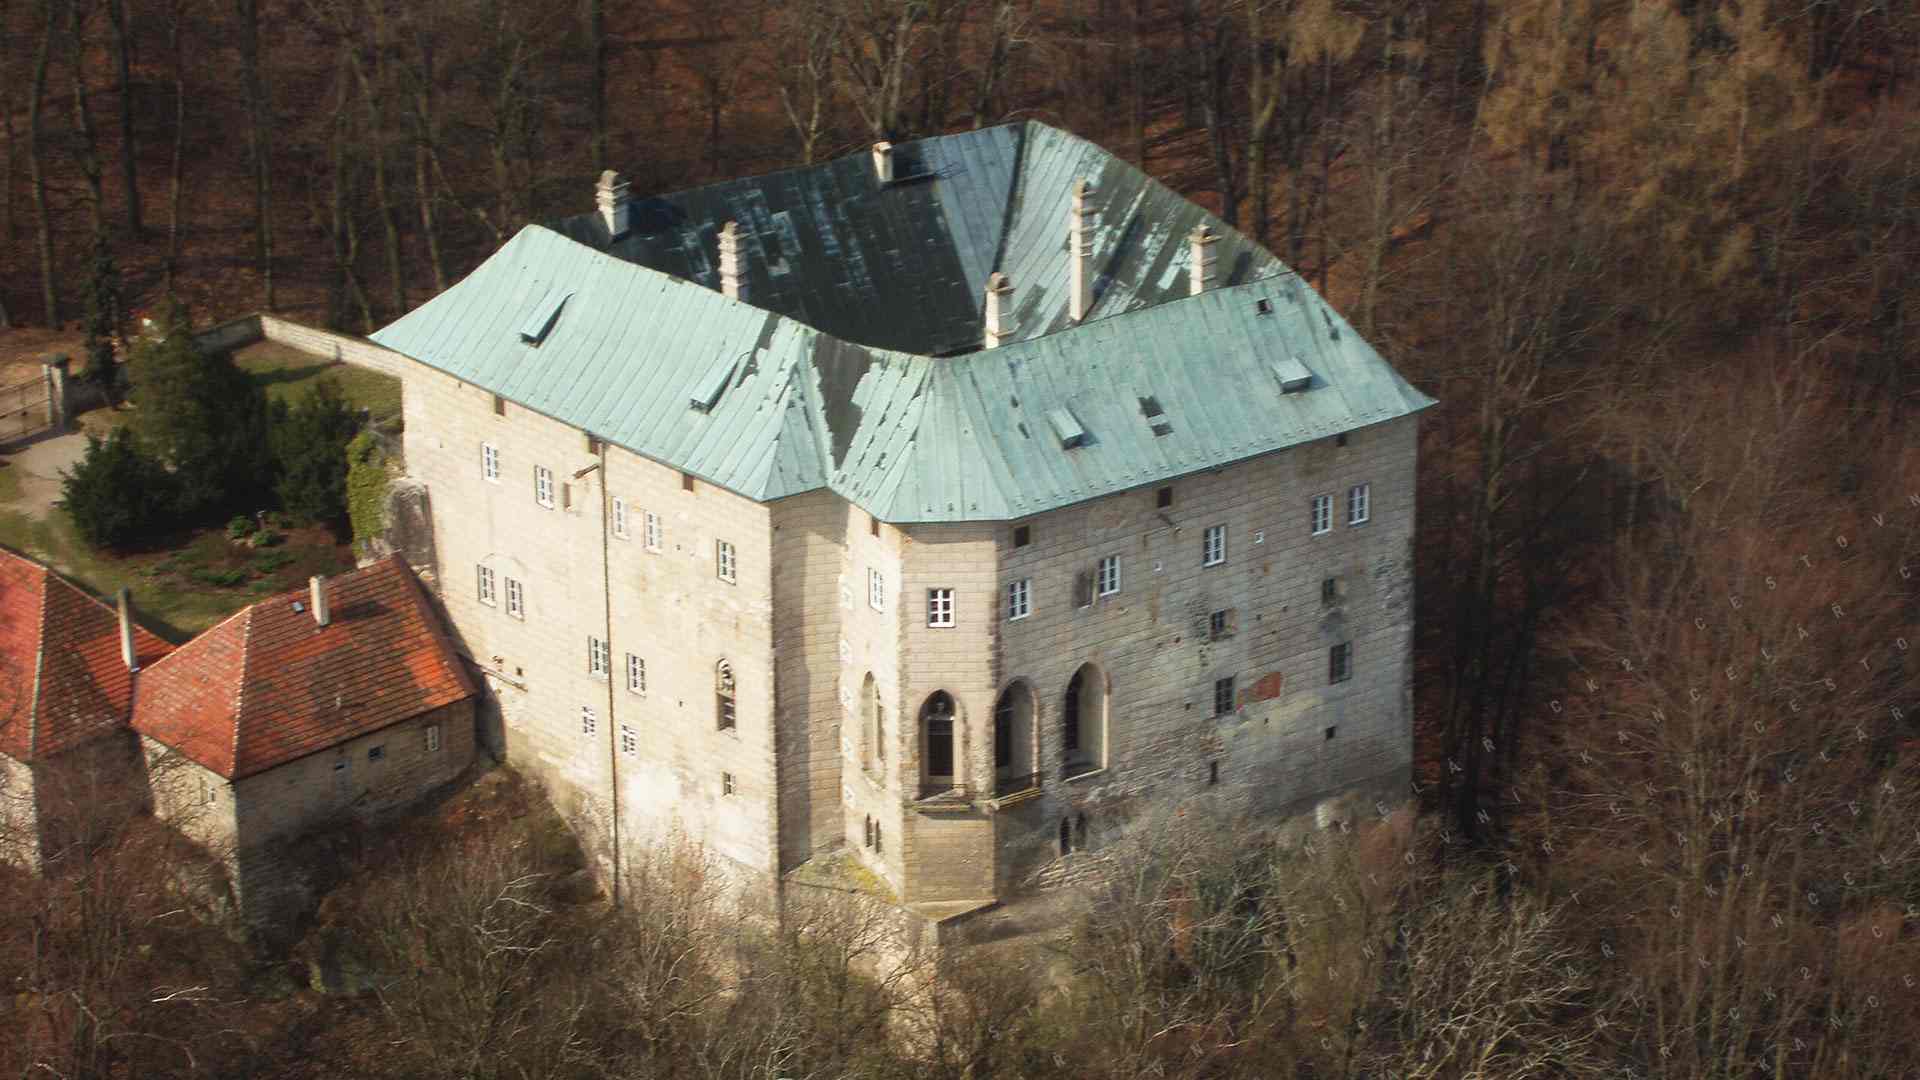 Houska Castle: The tale of "the gateway to hell" is not for the faint of heart! 1